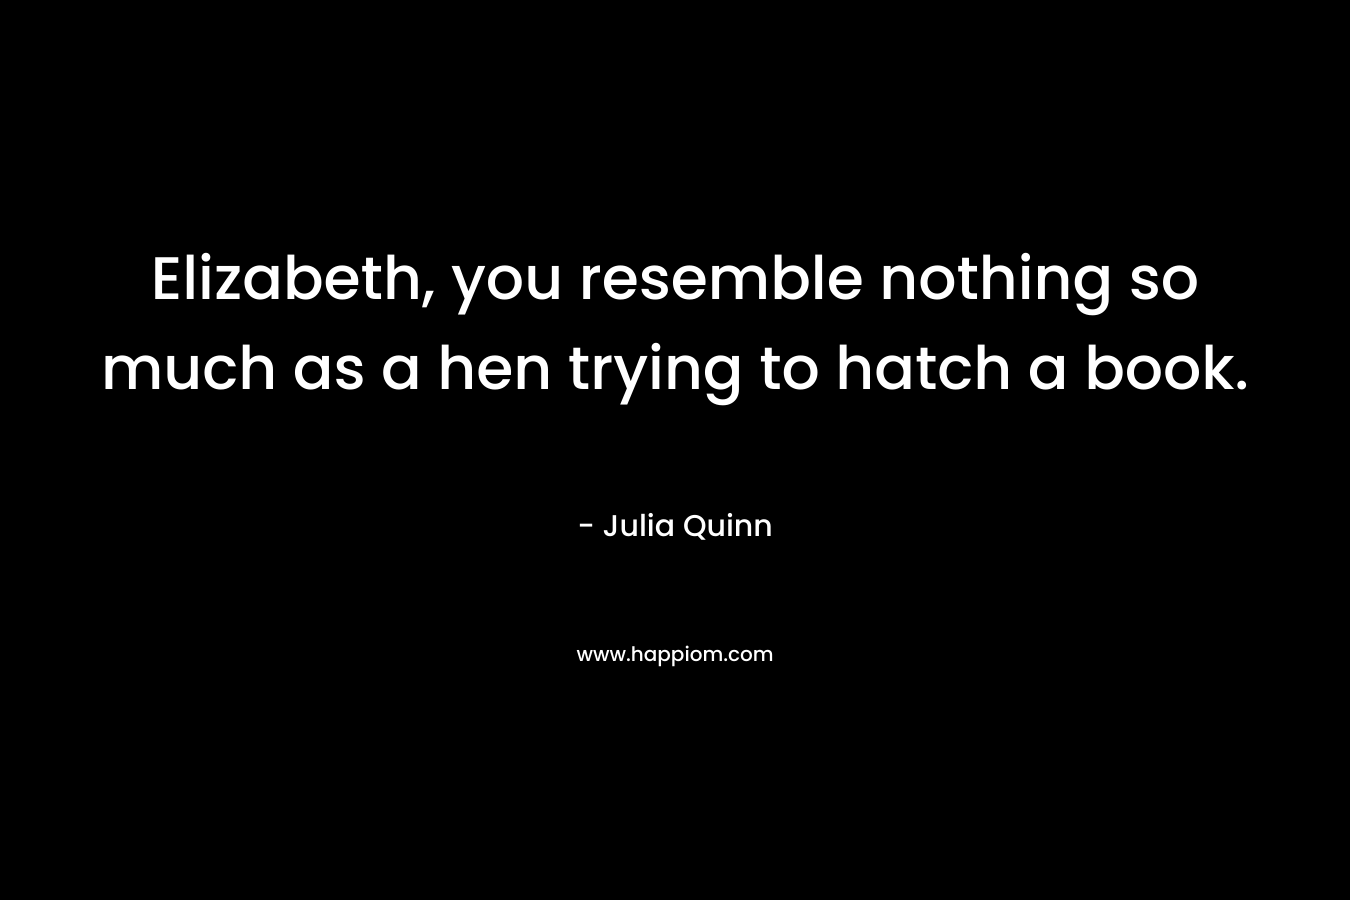 Elizabeth, you resemble nothing so much as a hen trying to hatch a book. – Julia Quinn